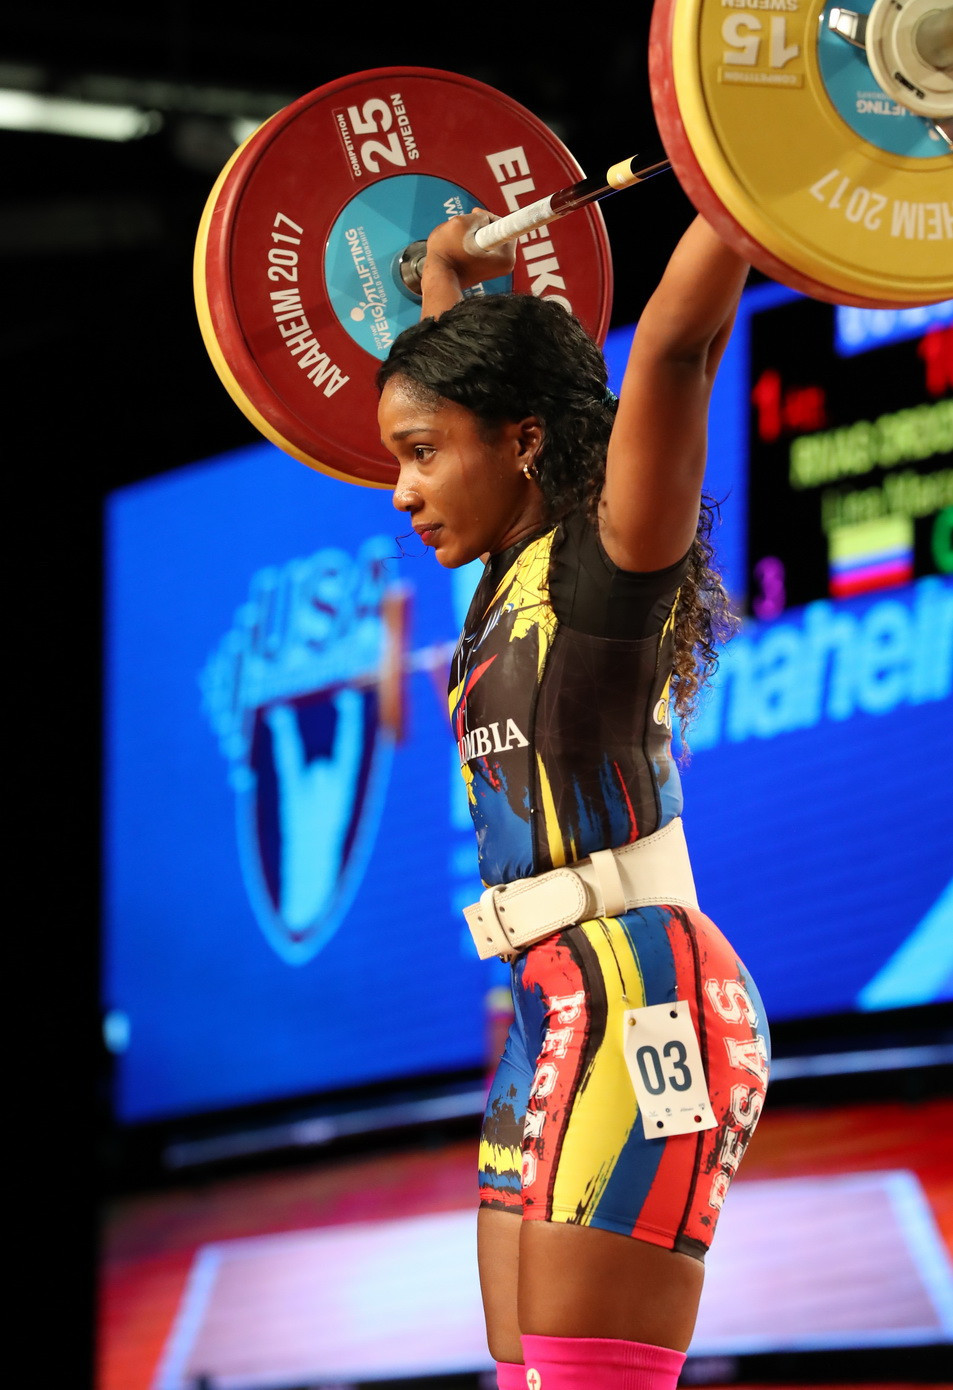 Colombia's Lina Marcela Rivas Ordonez finished in the runners-up spot with 225kg ©IWF